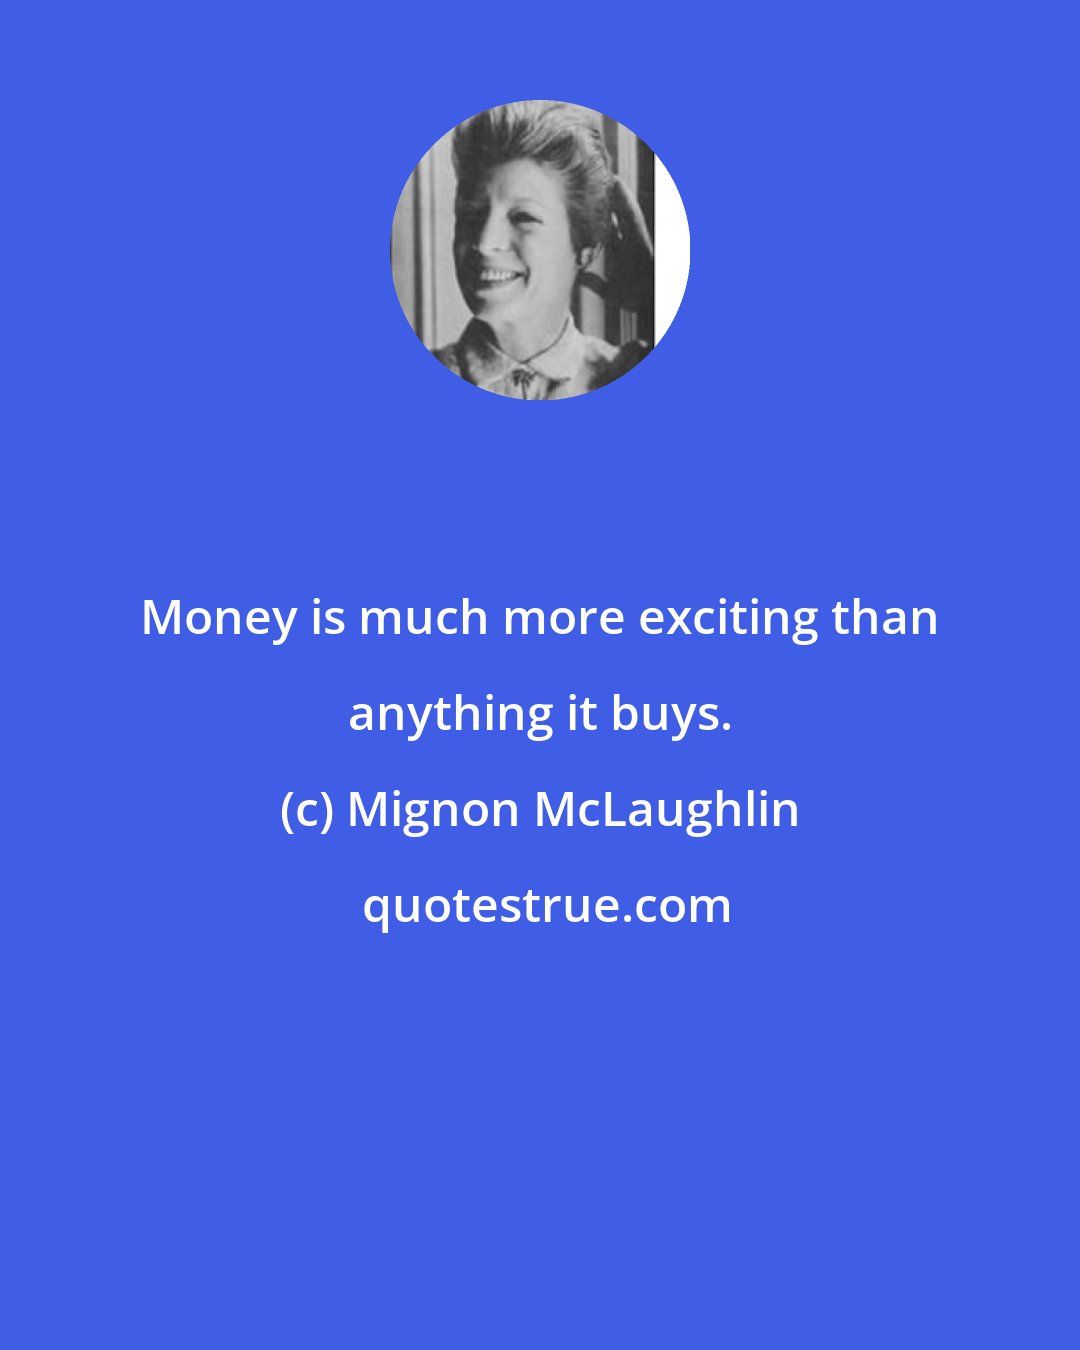 Mignon McLaughlin: Money is much more exciting than anything it buys.